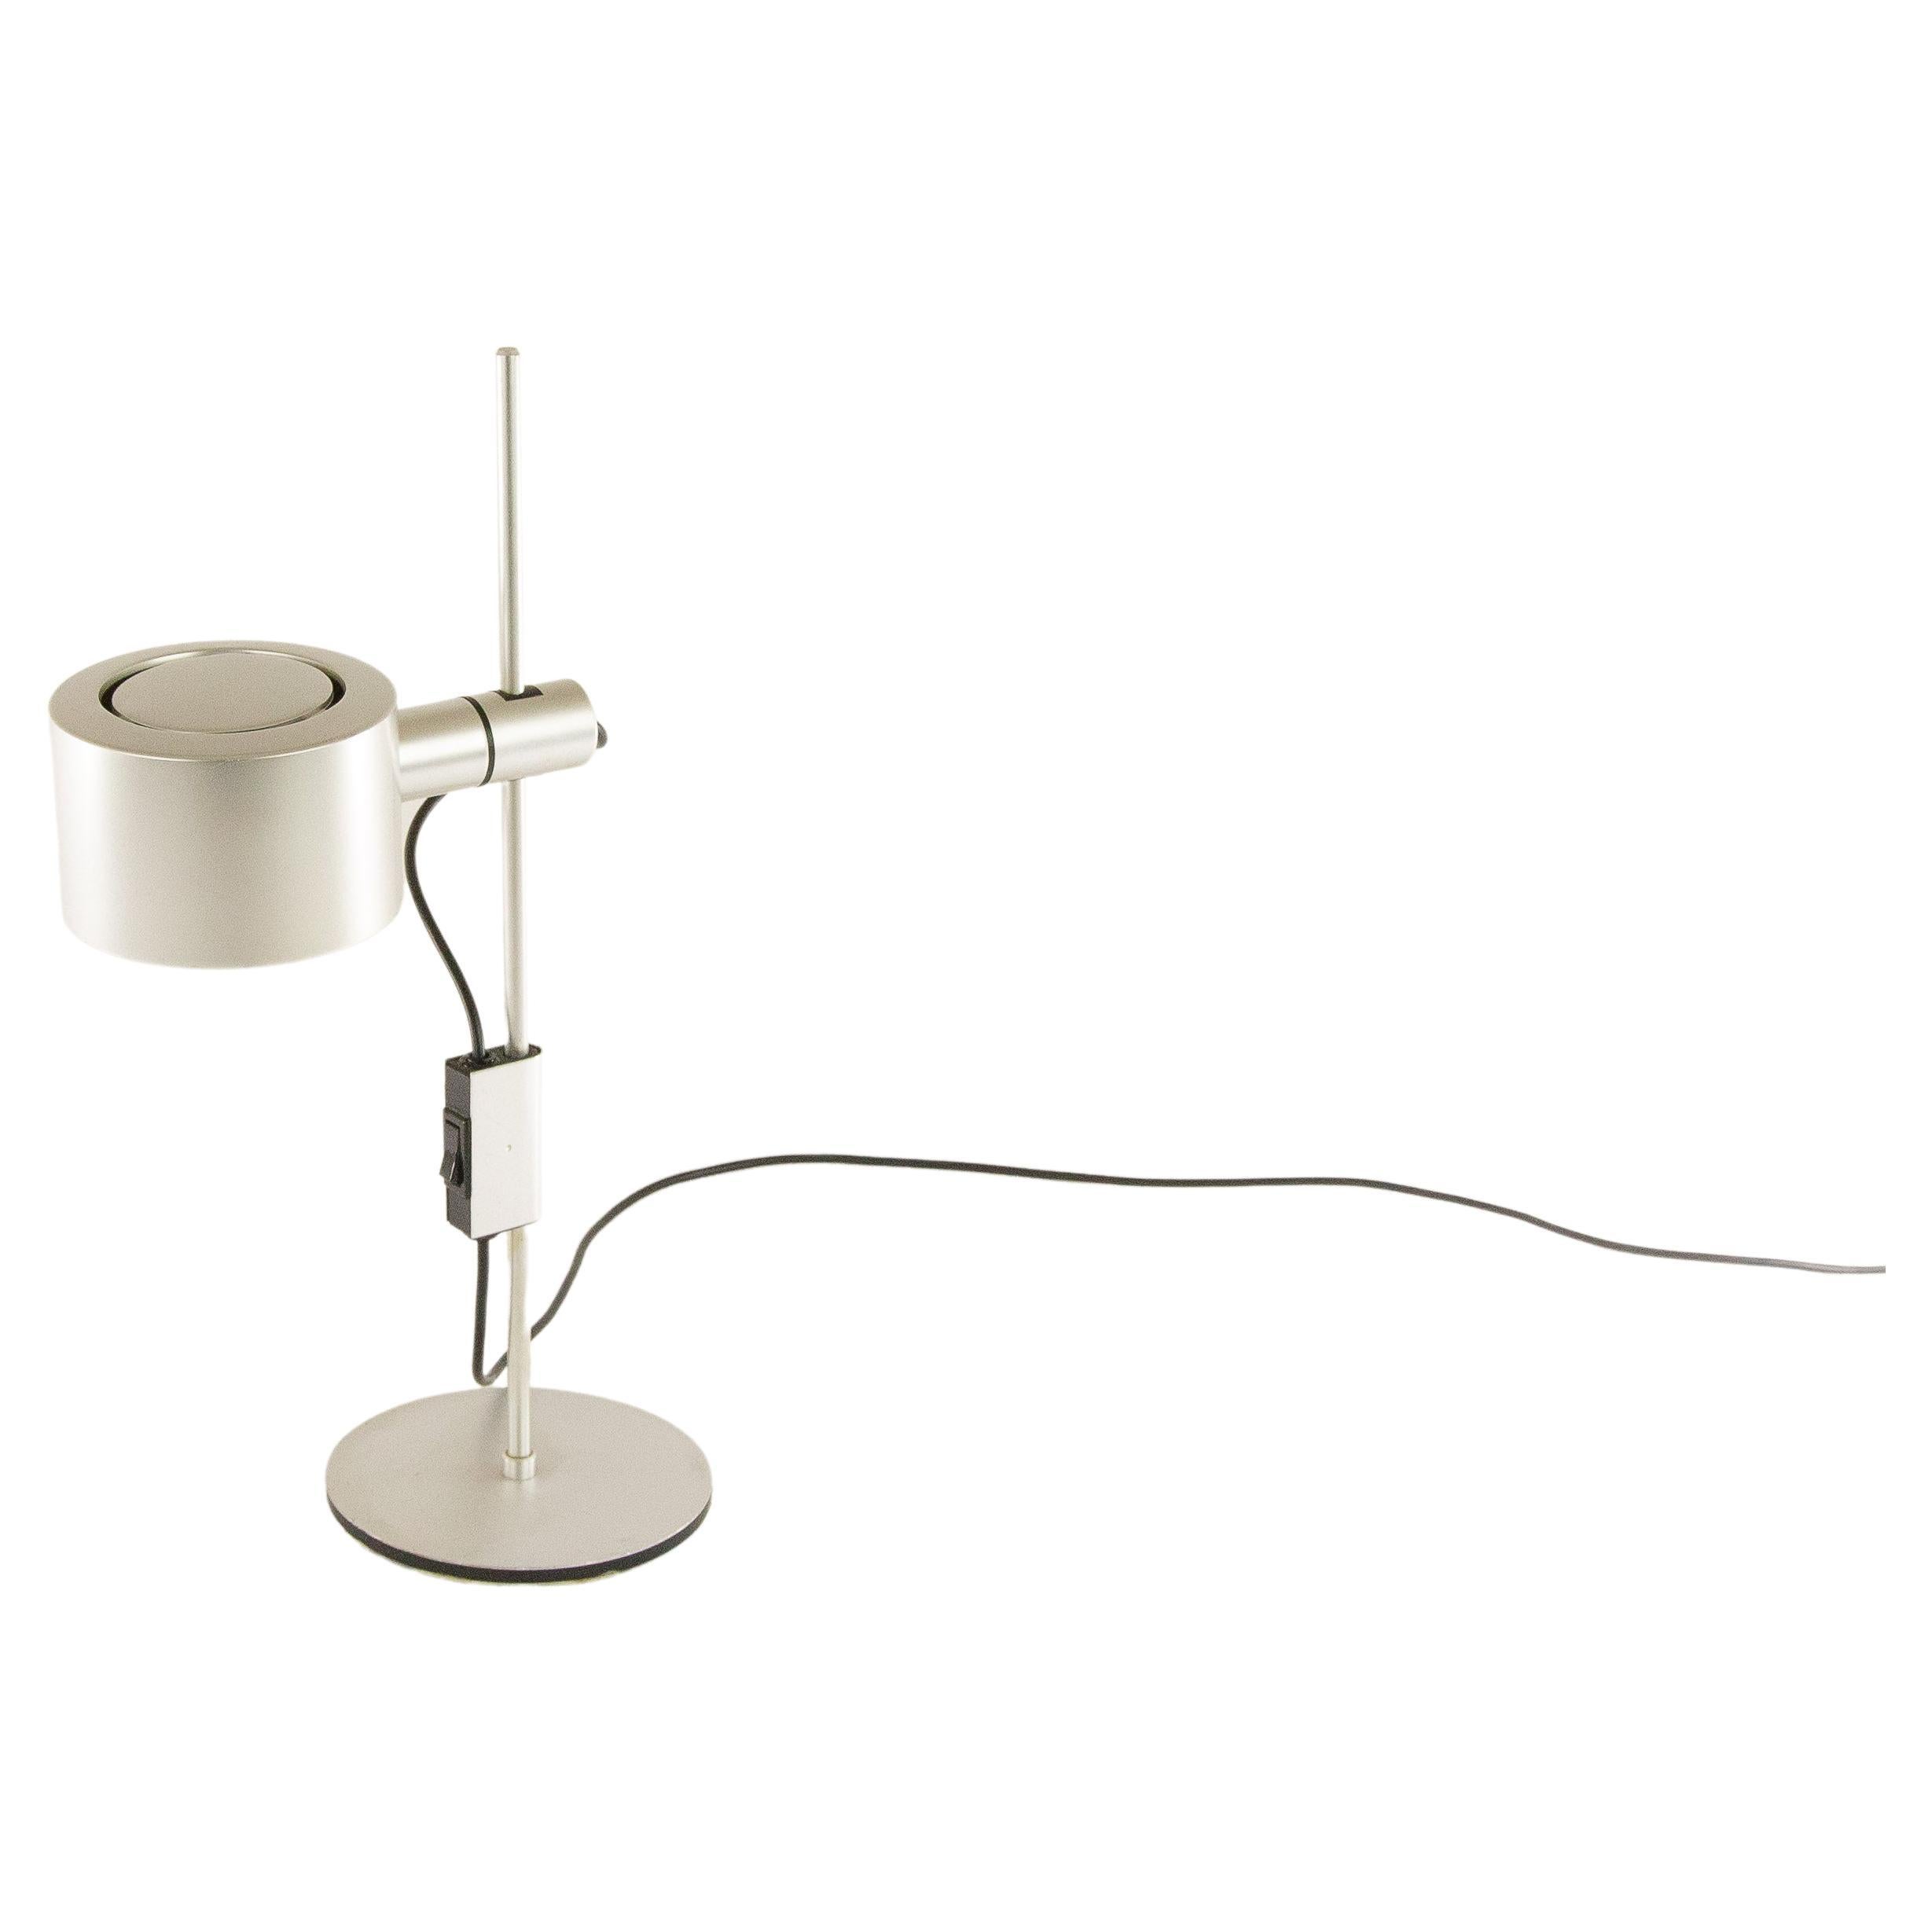 Aluminum desk lamp by Ronald Homes for Conelight Limited. The shade of the lamp is adjustable in height and rotatable.

This model is regularly wrongly attributed to Architectural Lighting Company (designer Peter Nelson), to Baltensweiler and to